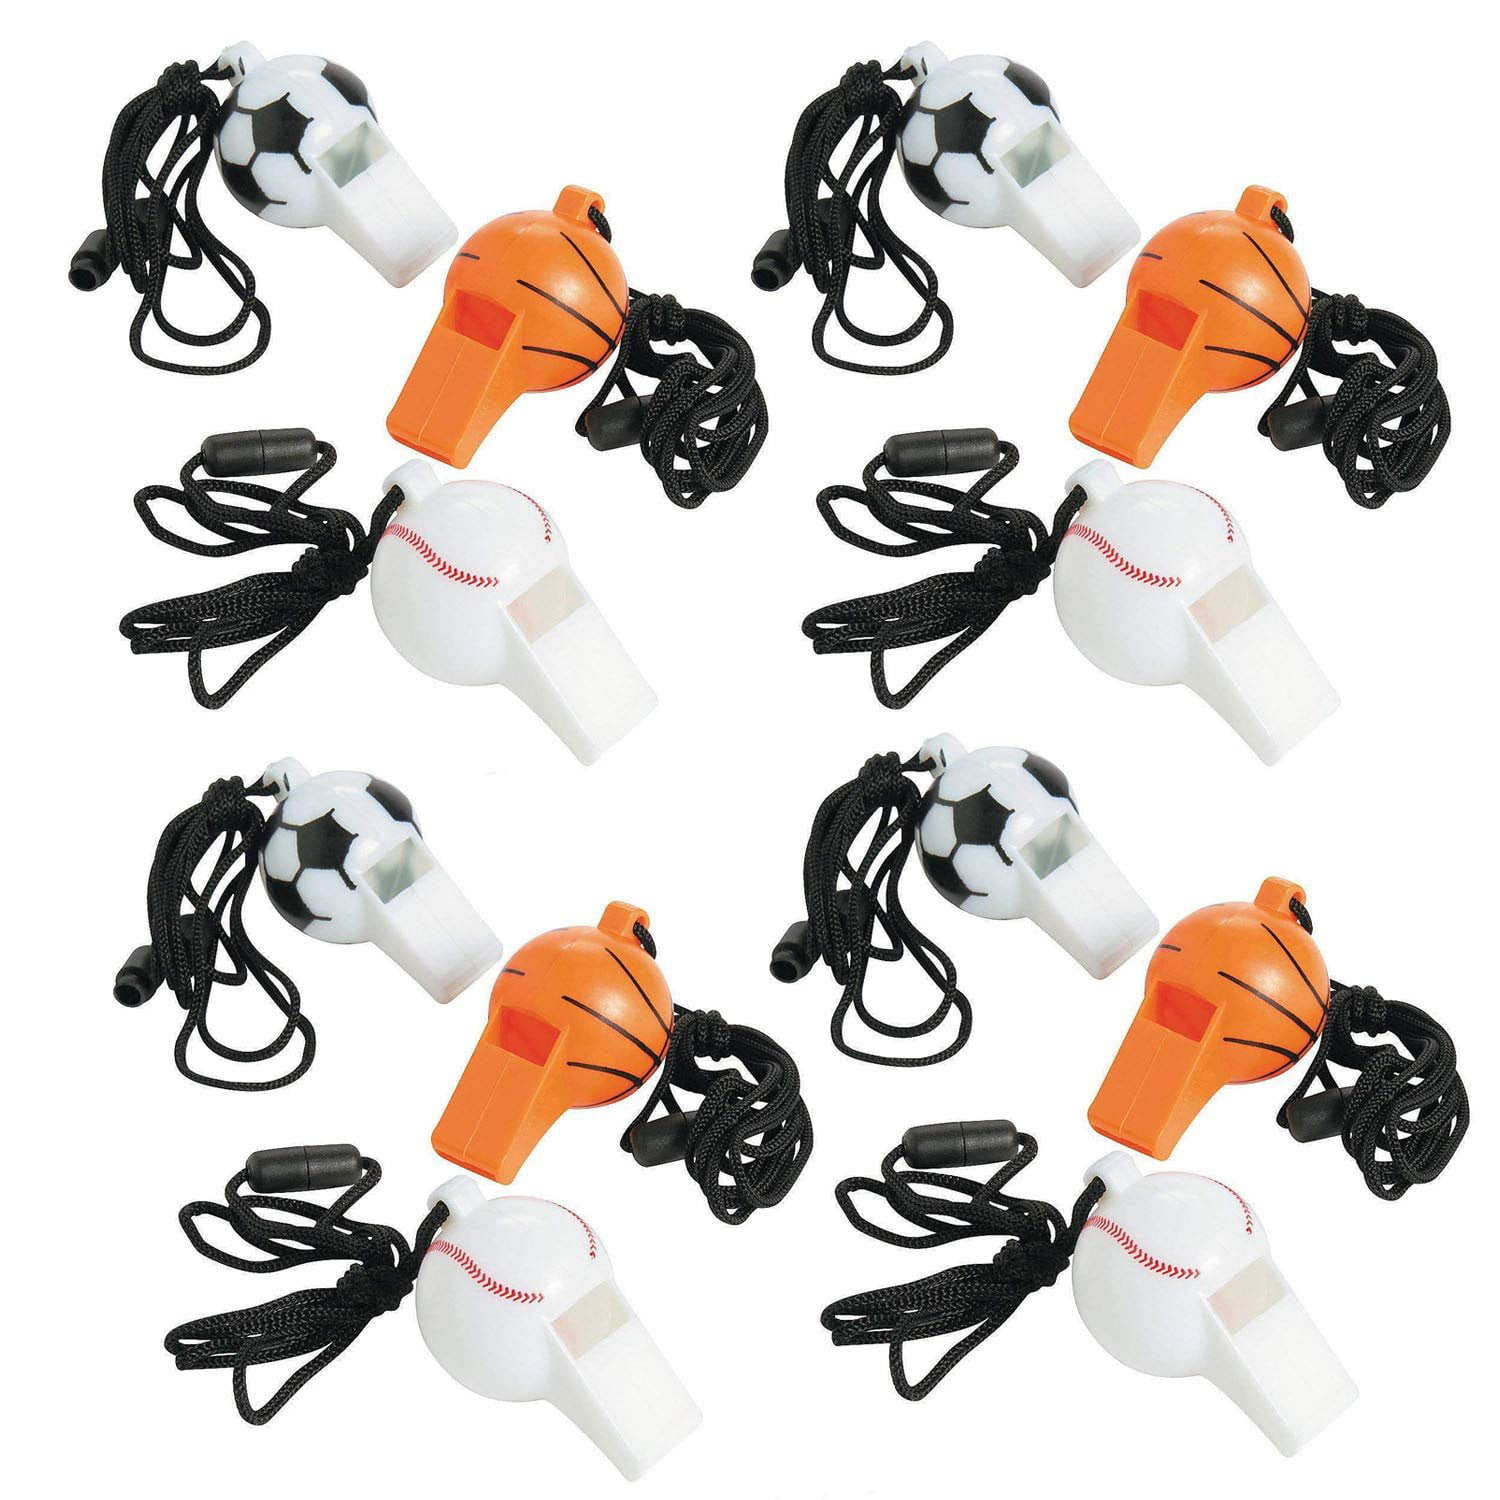 5 Colors JZZJ 40 Pieces Plastic Whistles with Lanyards for Party Sports 